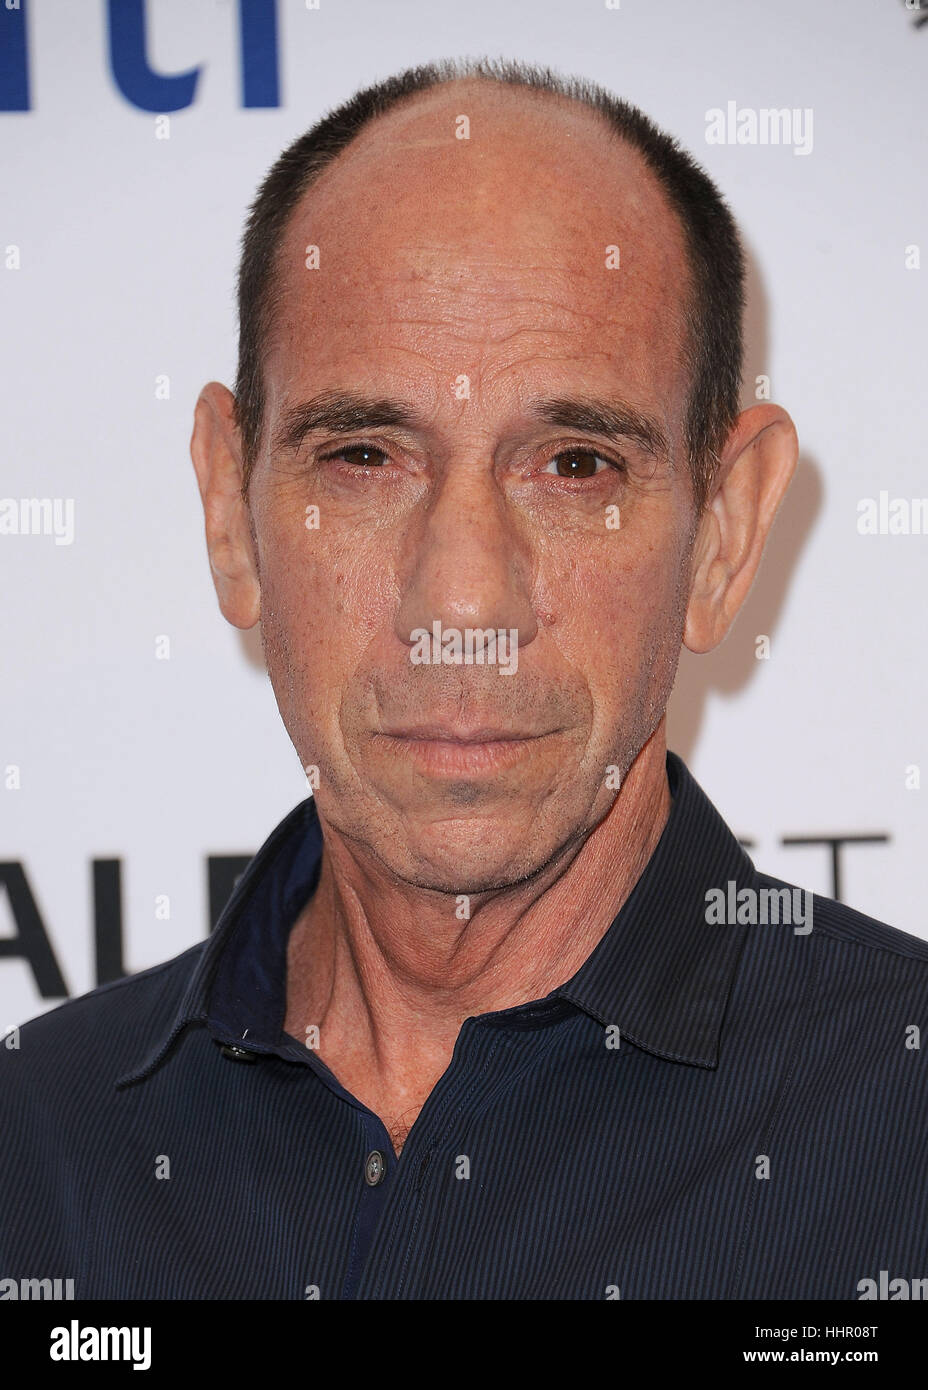 Beverly Hills, USA. 11th Sep, 2017. Miguel Ferrer at the 11th Annual PaleyFest Fall Preview of Univision's 'NCIS: Los Angeles' at the Paley Center for the Media in Beverly Hills. Credit: Pgsk/Media Punch/Alamy Live News Stock Photo